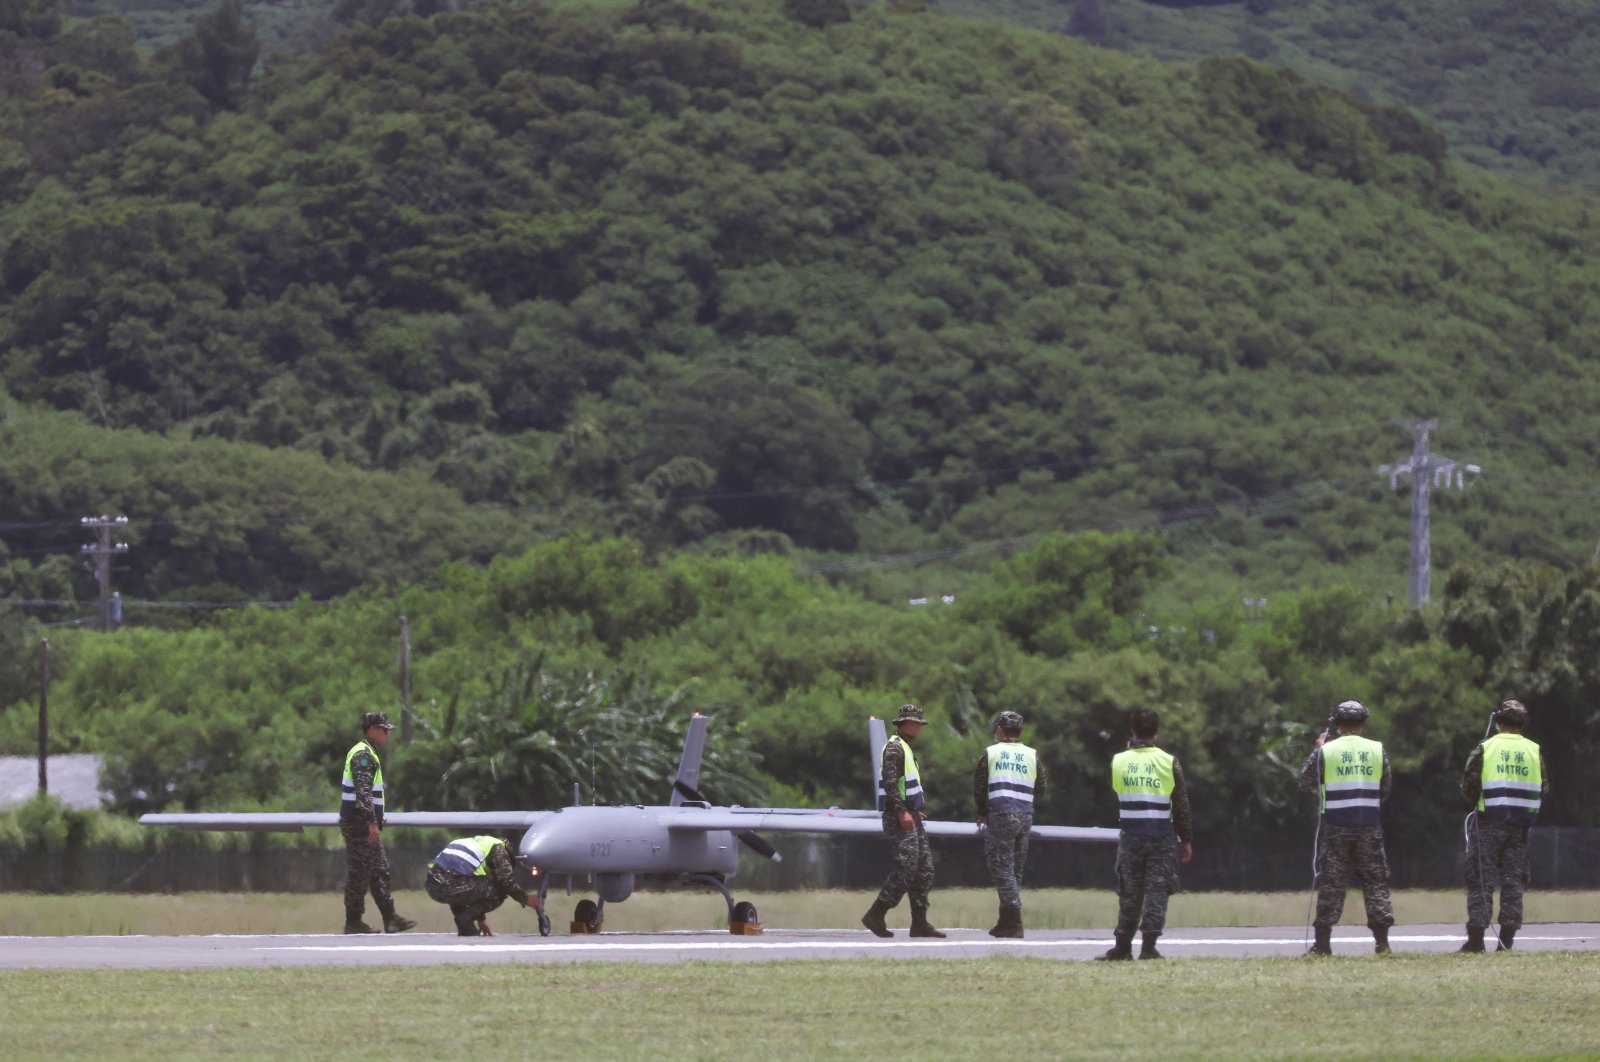 Military personnel stand near an Albatross unmanned aerial vehicle (UAV), during a military exercise at the Hengchun airport in Pingtung county, southern Taiwan, Aug. 9, 2022. (Reuters Photo)